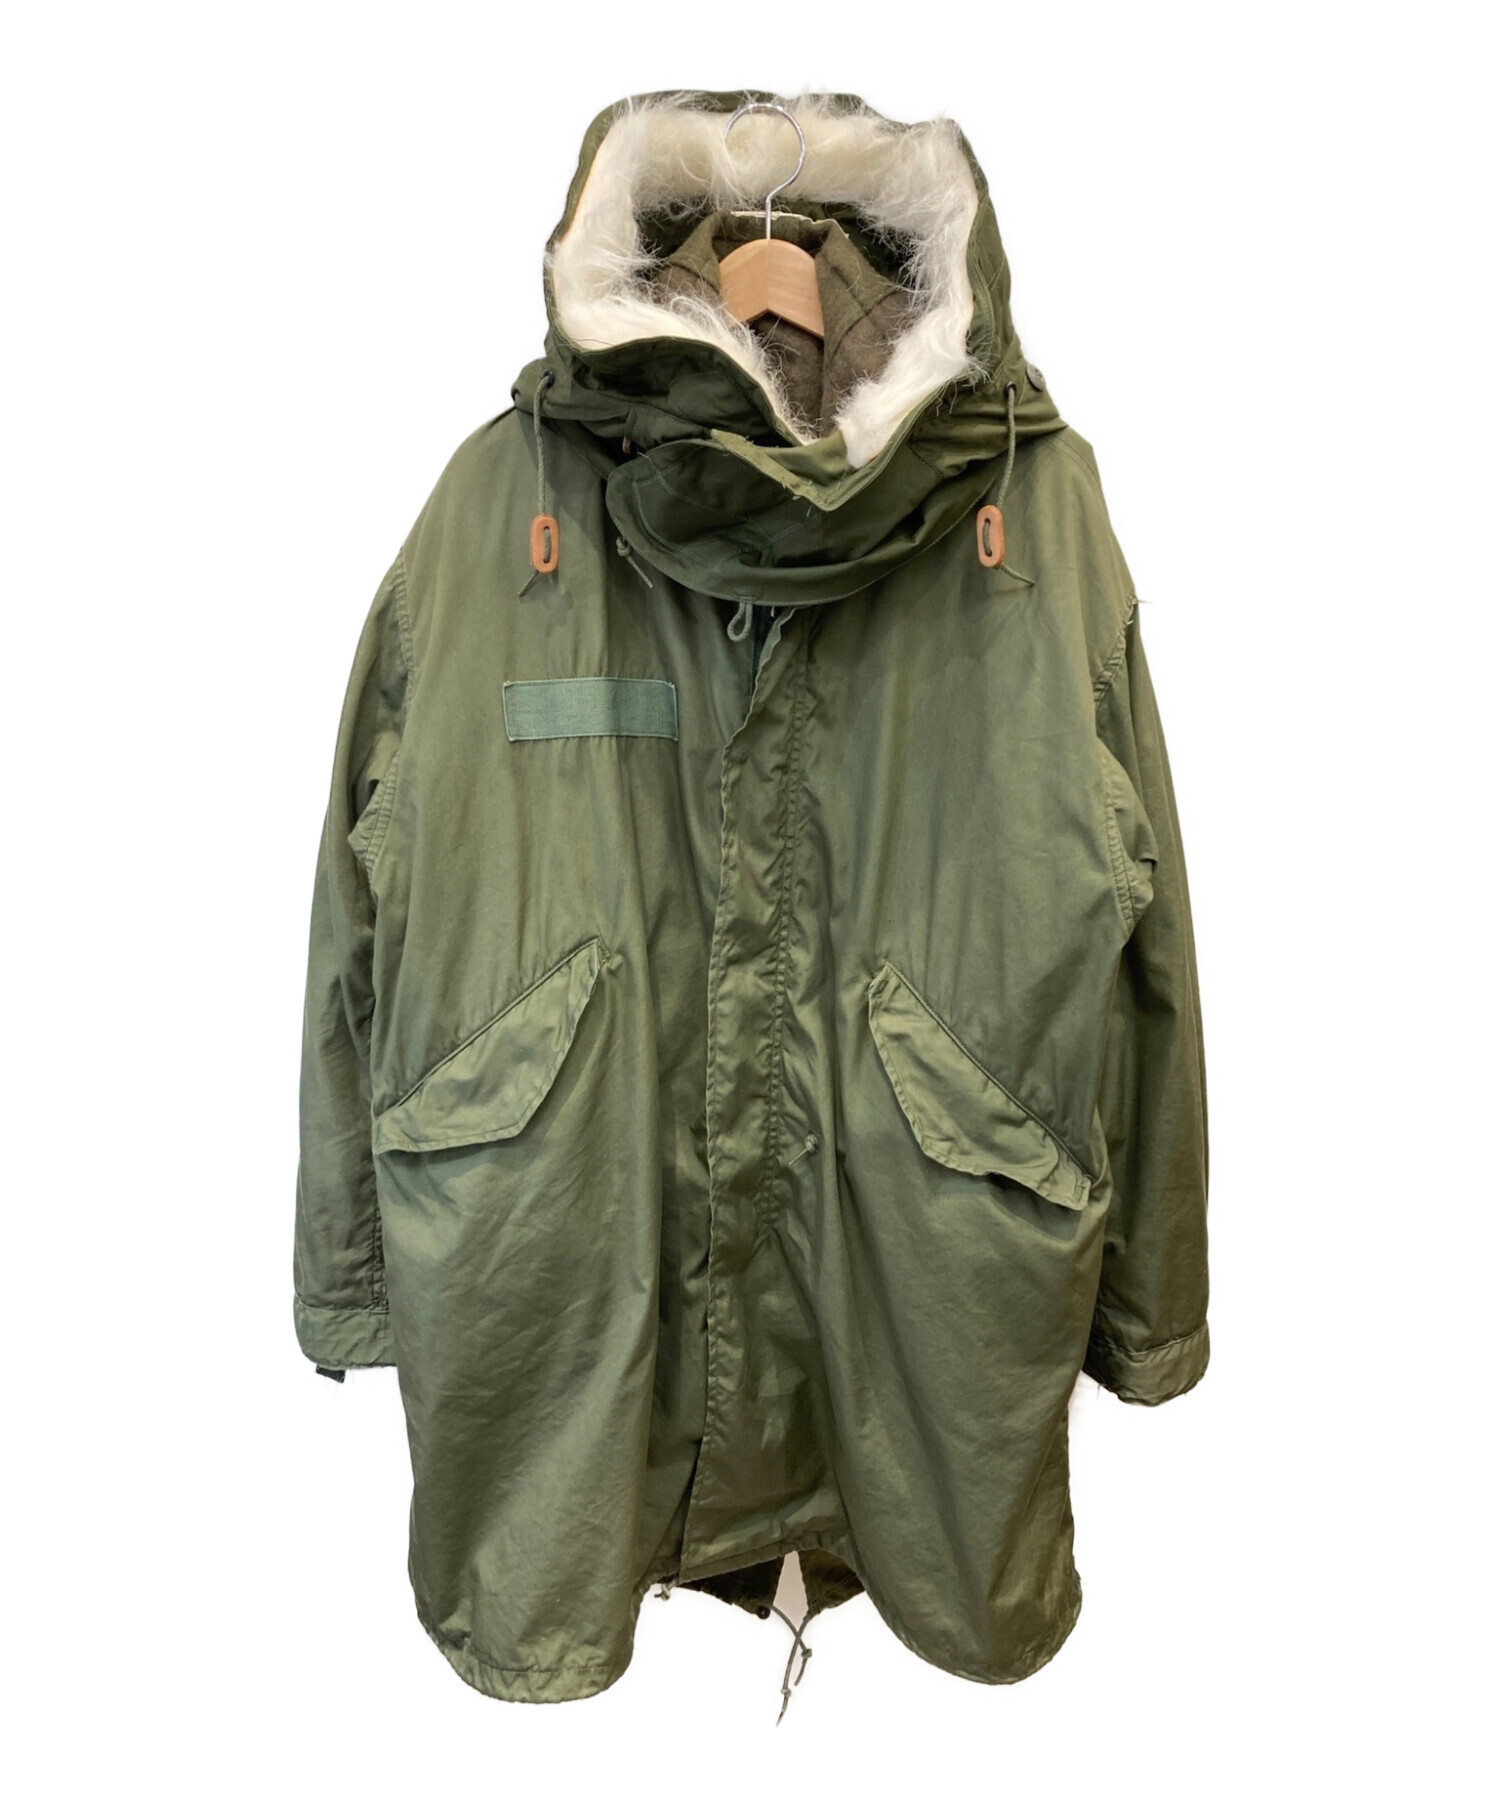 US ARMY(ユーエスアーミー) M-65 COLD WEATHER COAT